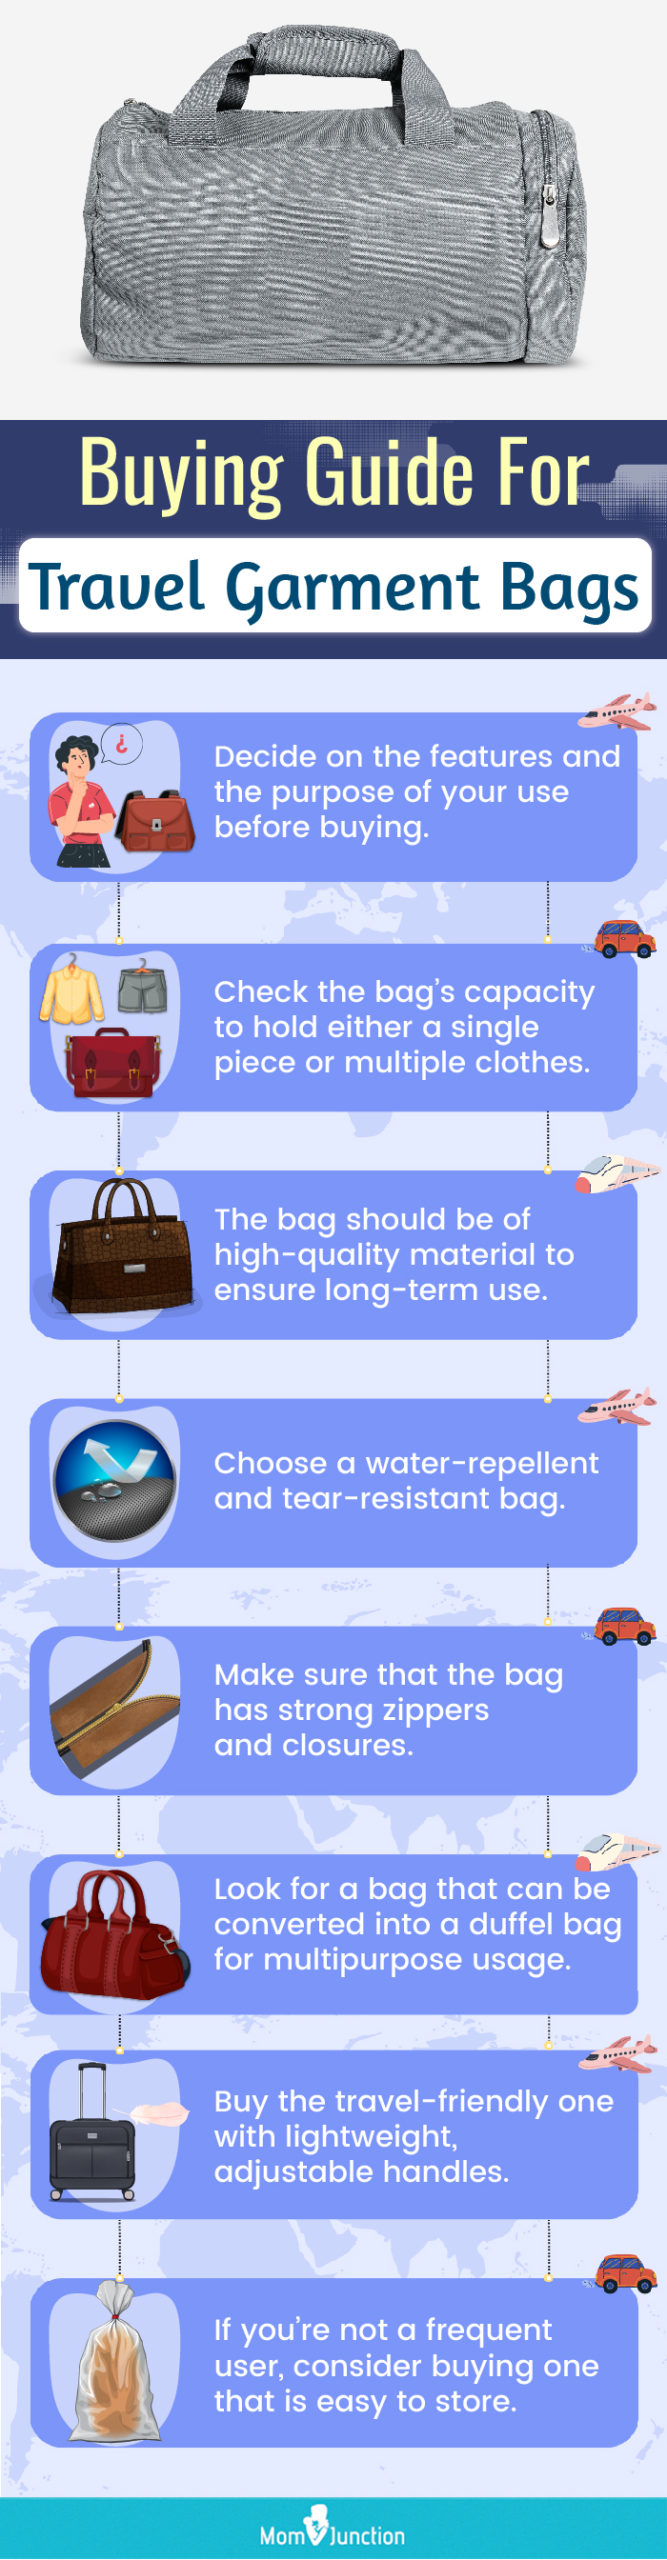 Buying Guide For Travel Garment Bags (infographic)